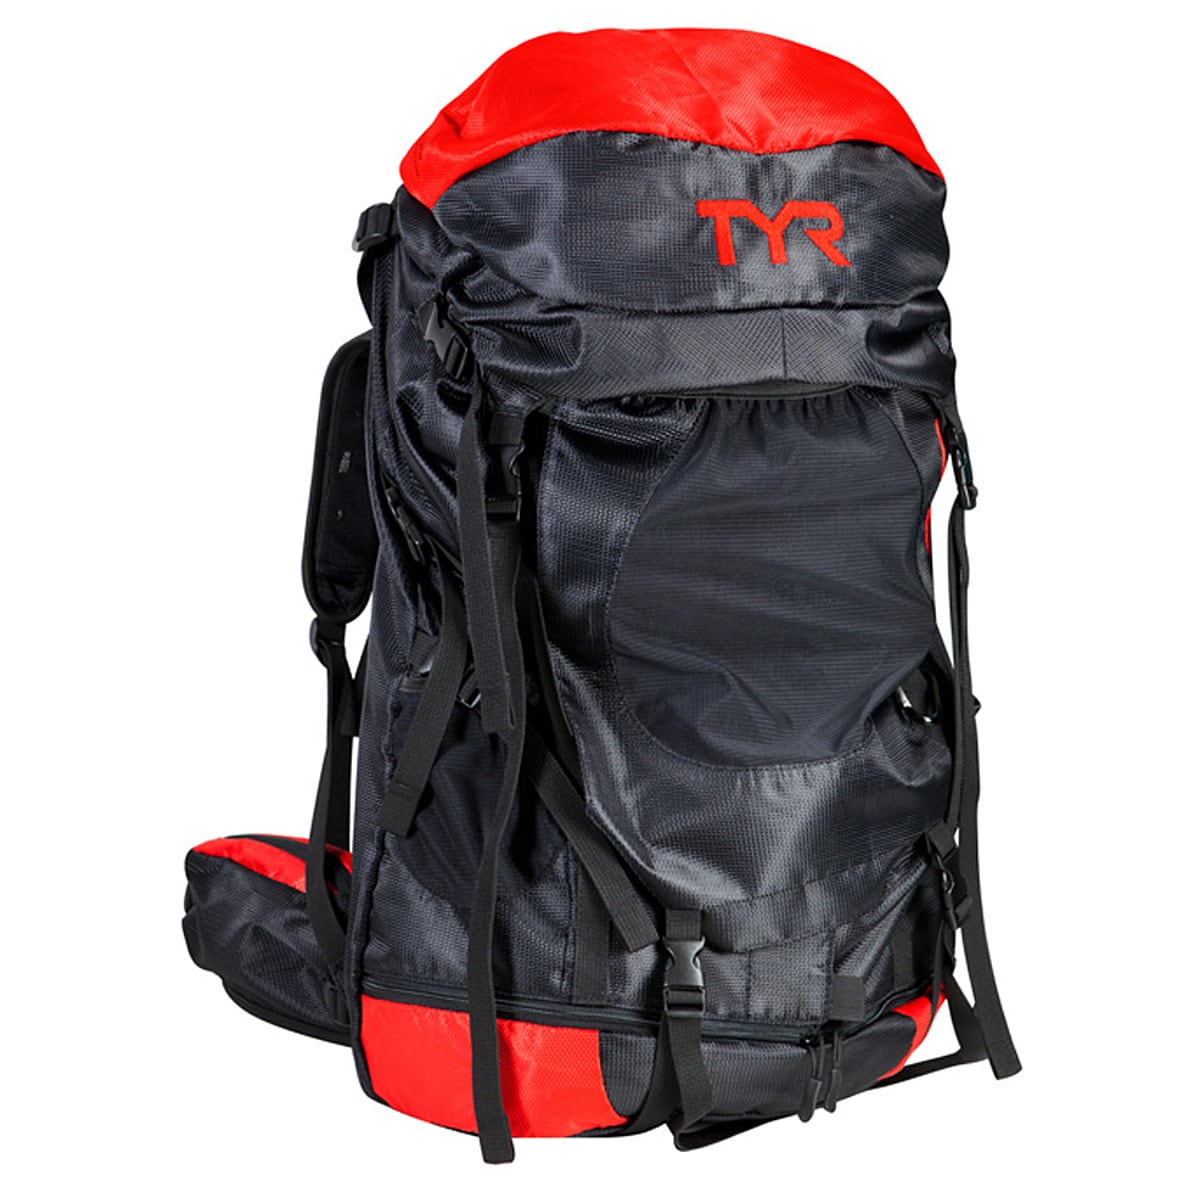 TYR Convoy Transition Backpack - 4577cu in